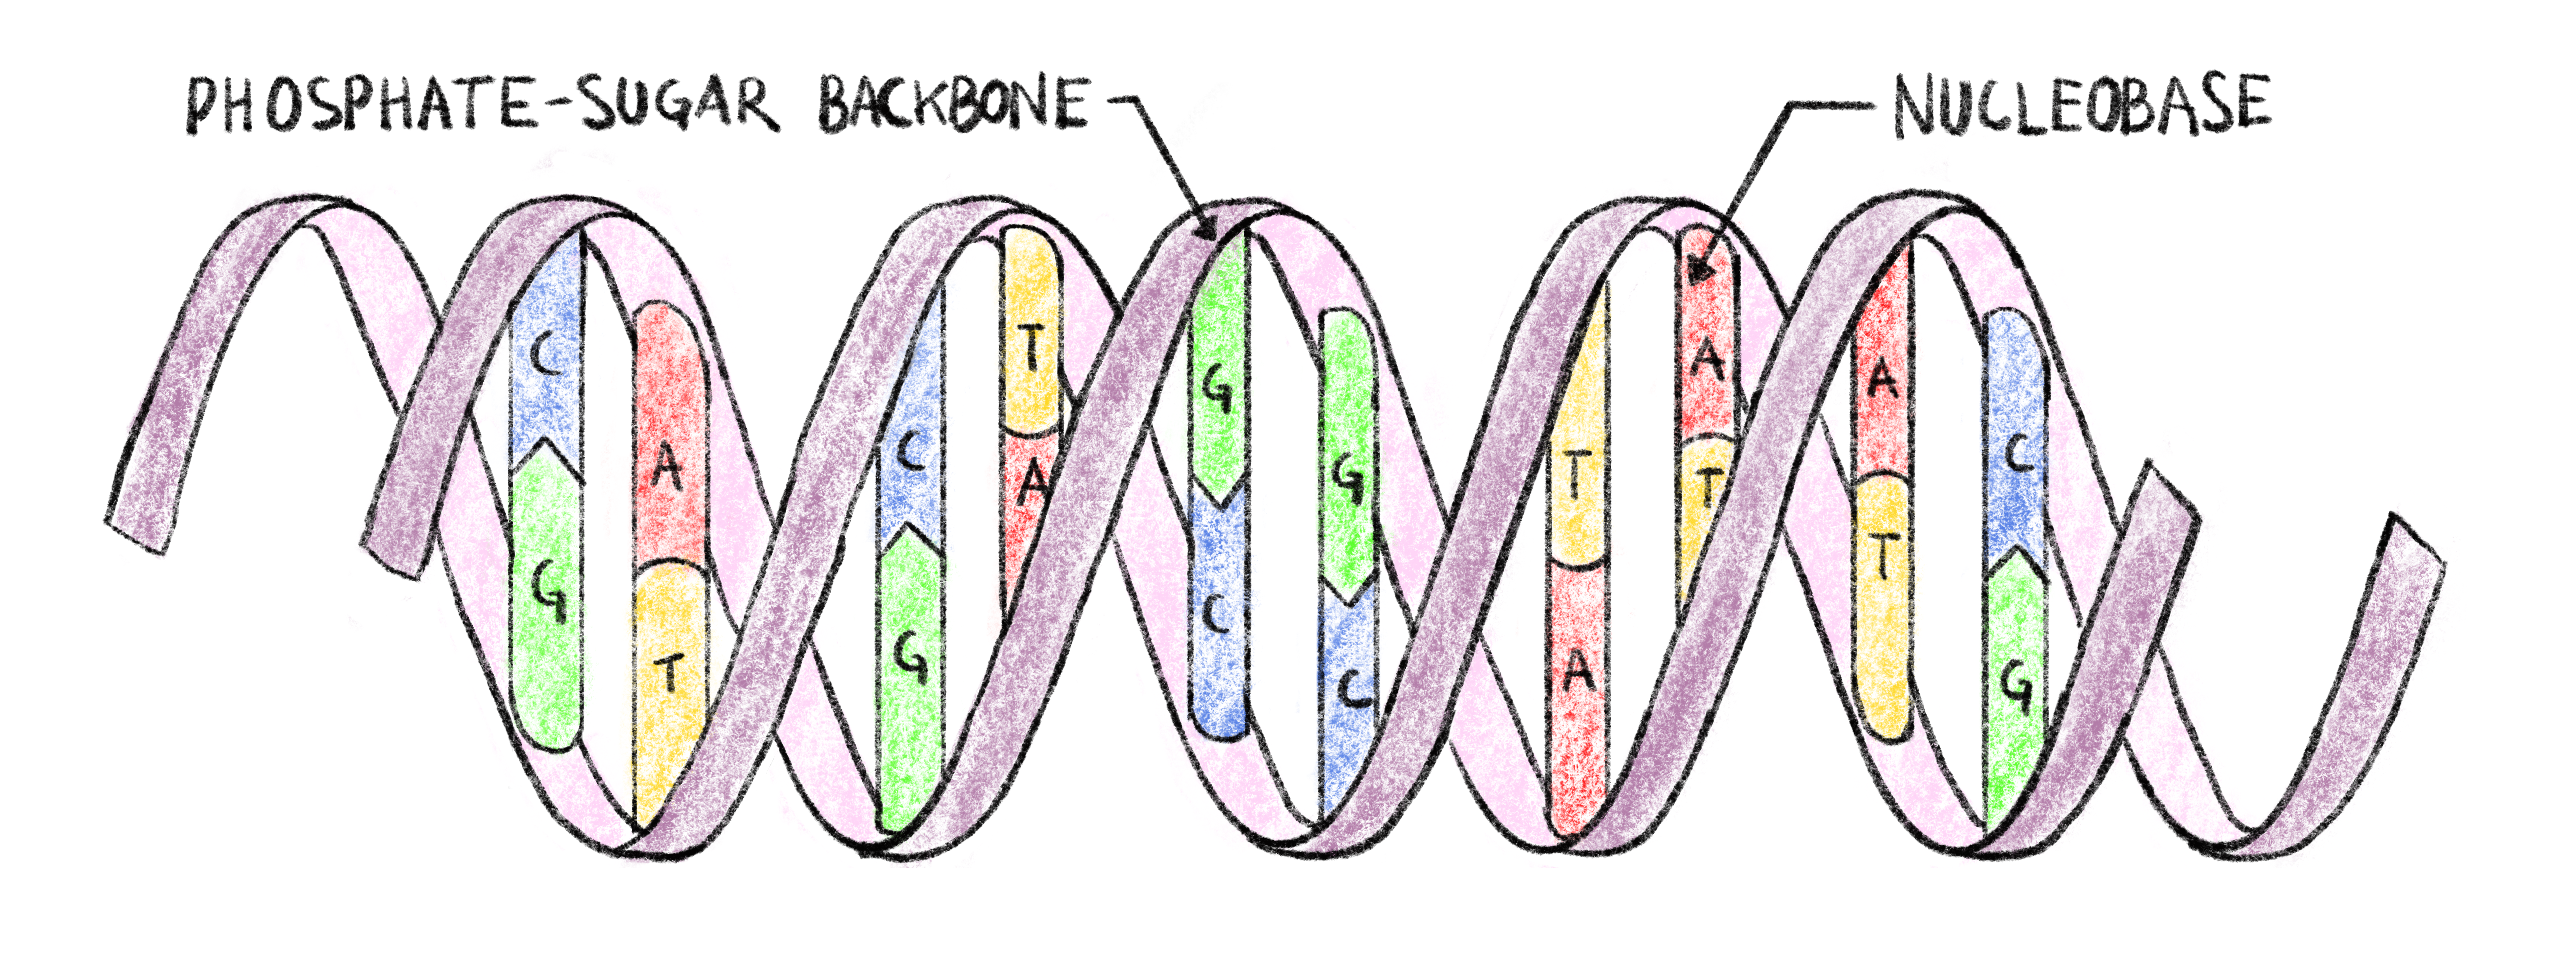 **Double-helix structure of DNA.**  
Each strand of DNA has a phosphate-sugar backbone on which are attached nucleobases. The two strands are linked by complementary bonds between the nucleobases of different strands (A bonding with T and C bonding with G), encoding the same information of both strands.